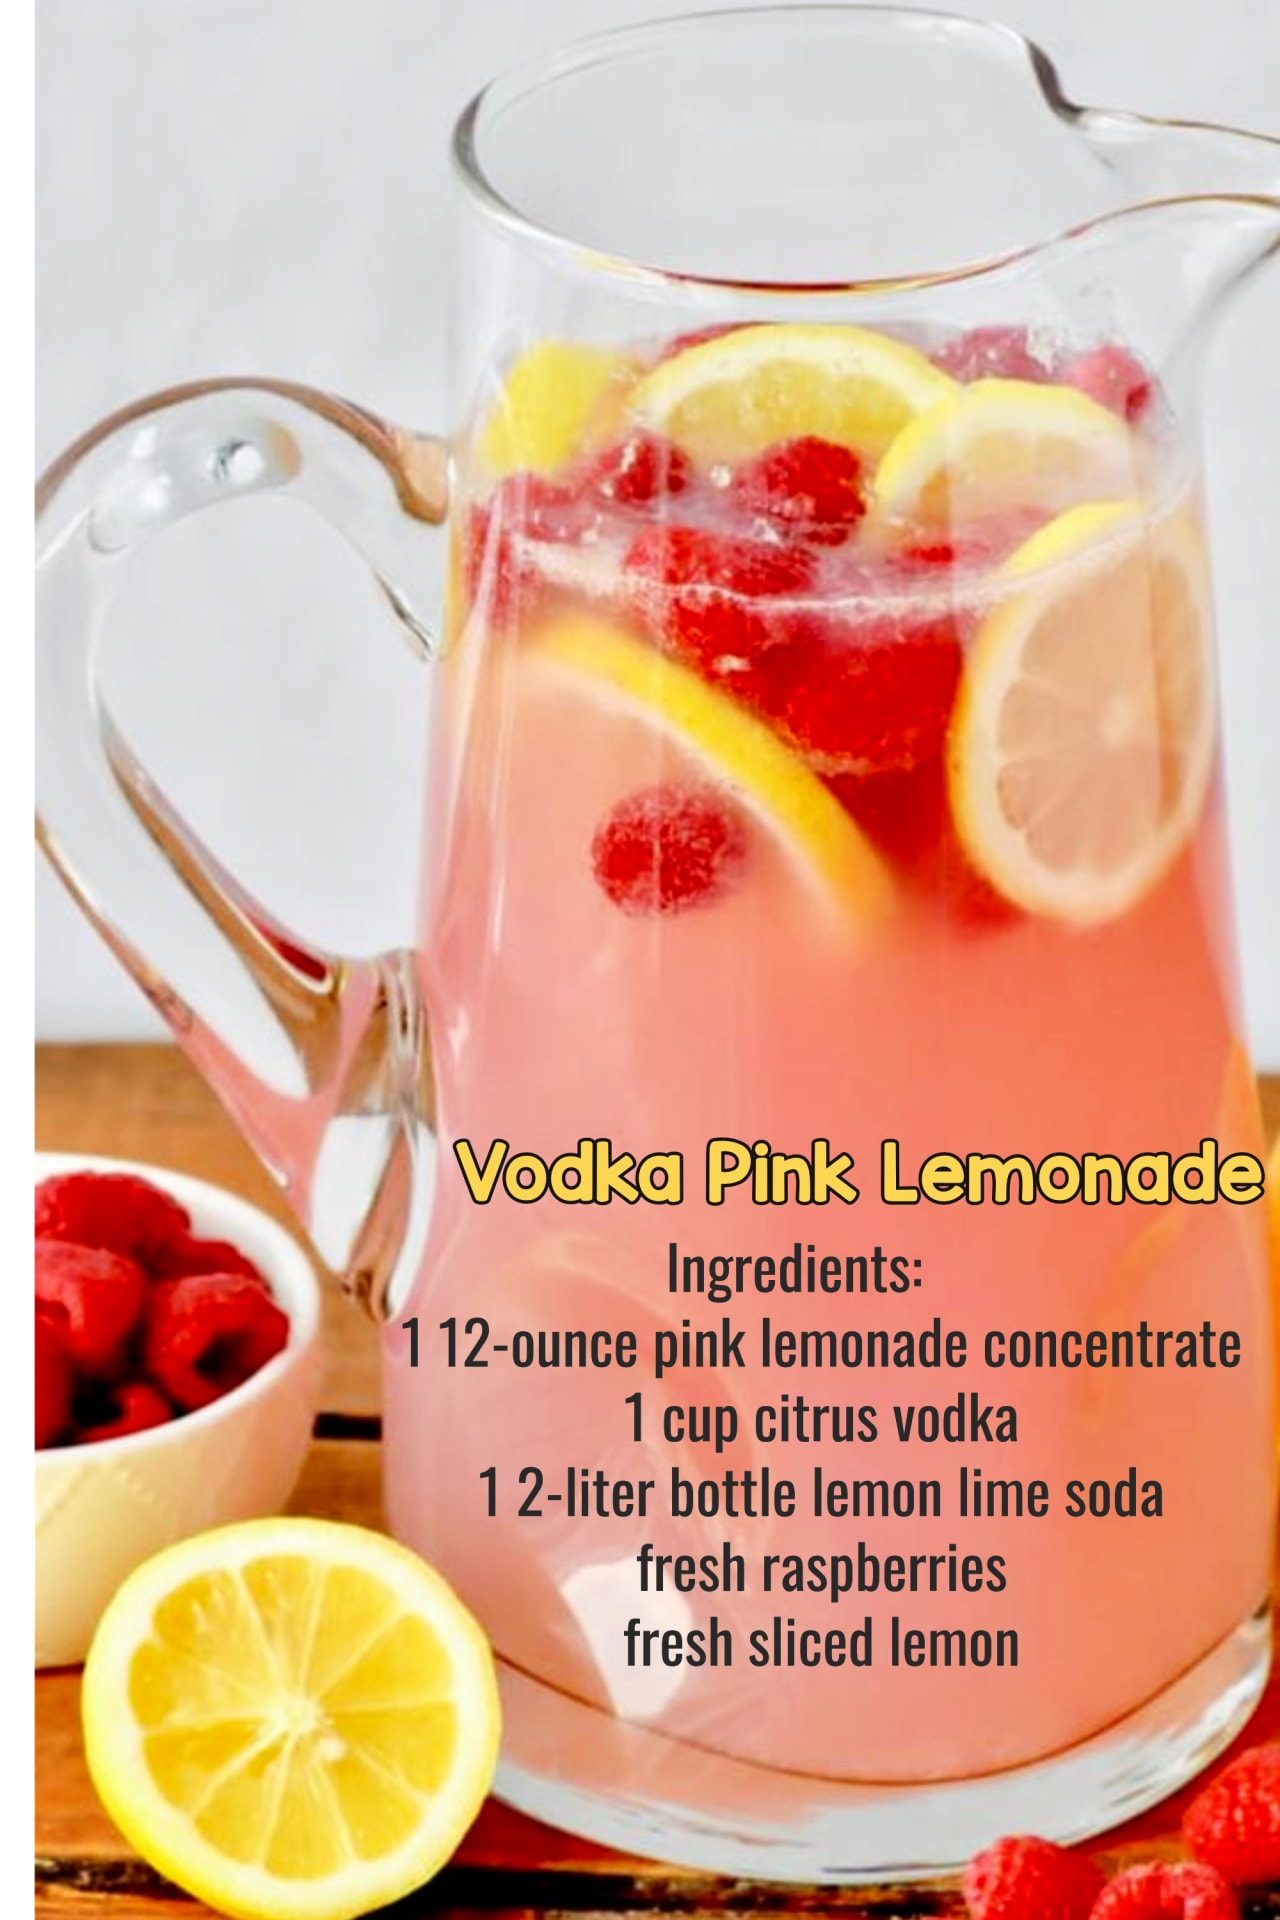 Vodka Pink Lemonade Party Punch Recipe - Easy Punch Recipes for a Crowd and Easy Party Drinks Ideas - Cranberry Vodka Punch, Pineapple Orange Juice Alcoholic Drinks, Punch for 50 and Simple Punch Recipes for a Crowd, Party, Brunch, Cookout or Bridal Shower - non-alcoholic punch recipes and simple alcoholic punch recipes, non-alcoholic holiday punch, easy fruit punch recipes, easy punch recipes with sprite and pineapple juice, jungle juice recipe with fruit